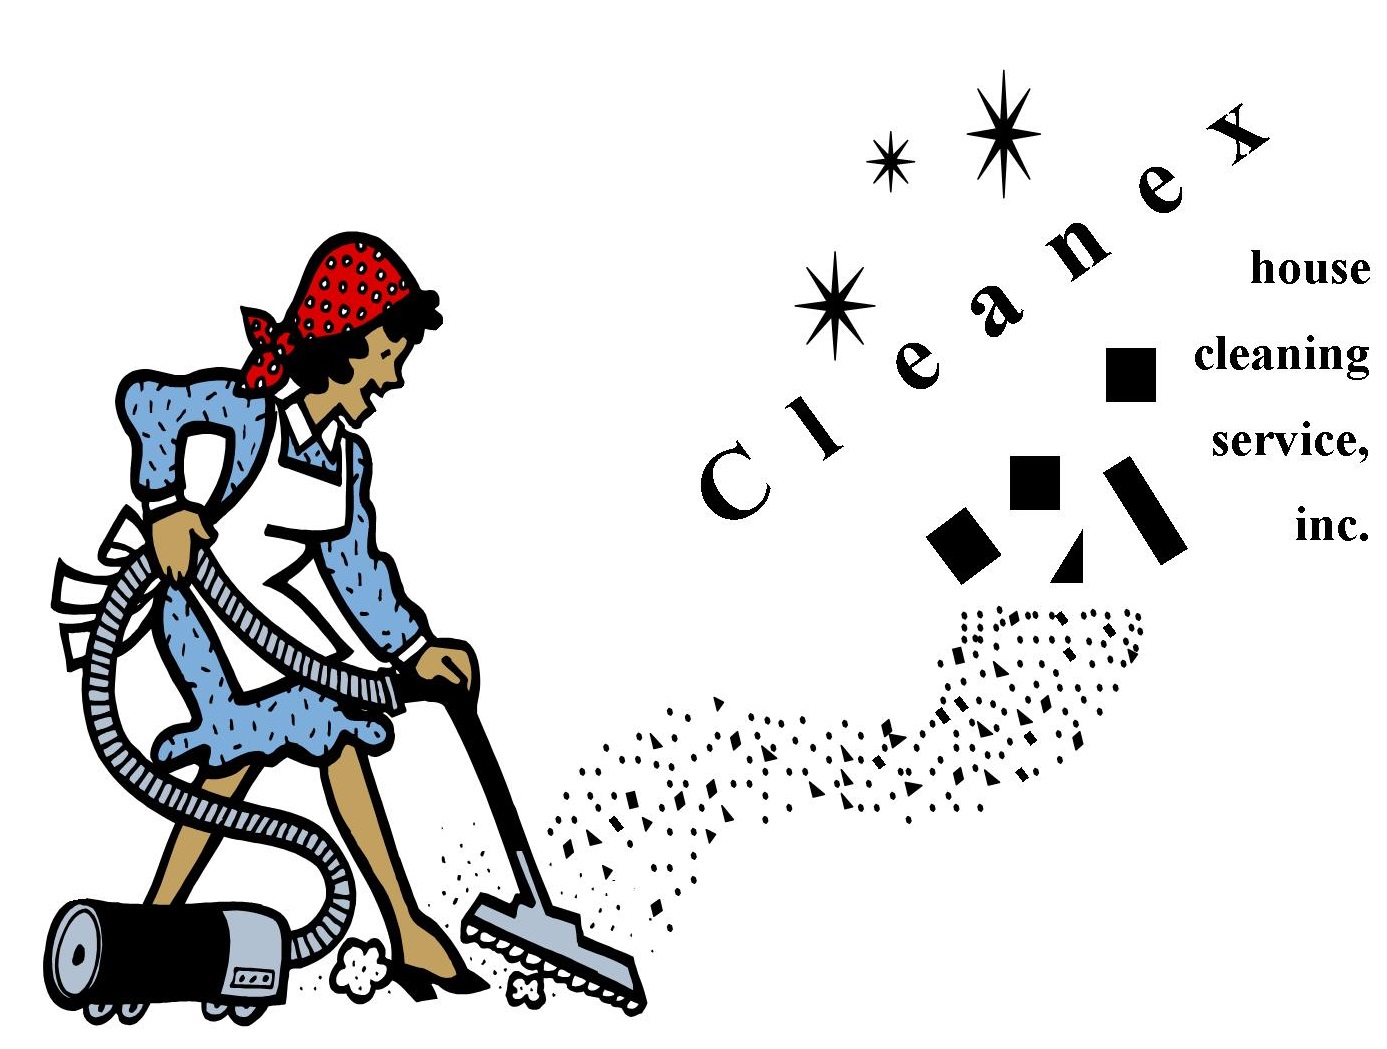 Cleanex House Cleaning Service, Inc. Logo